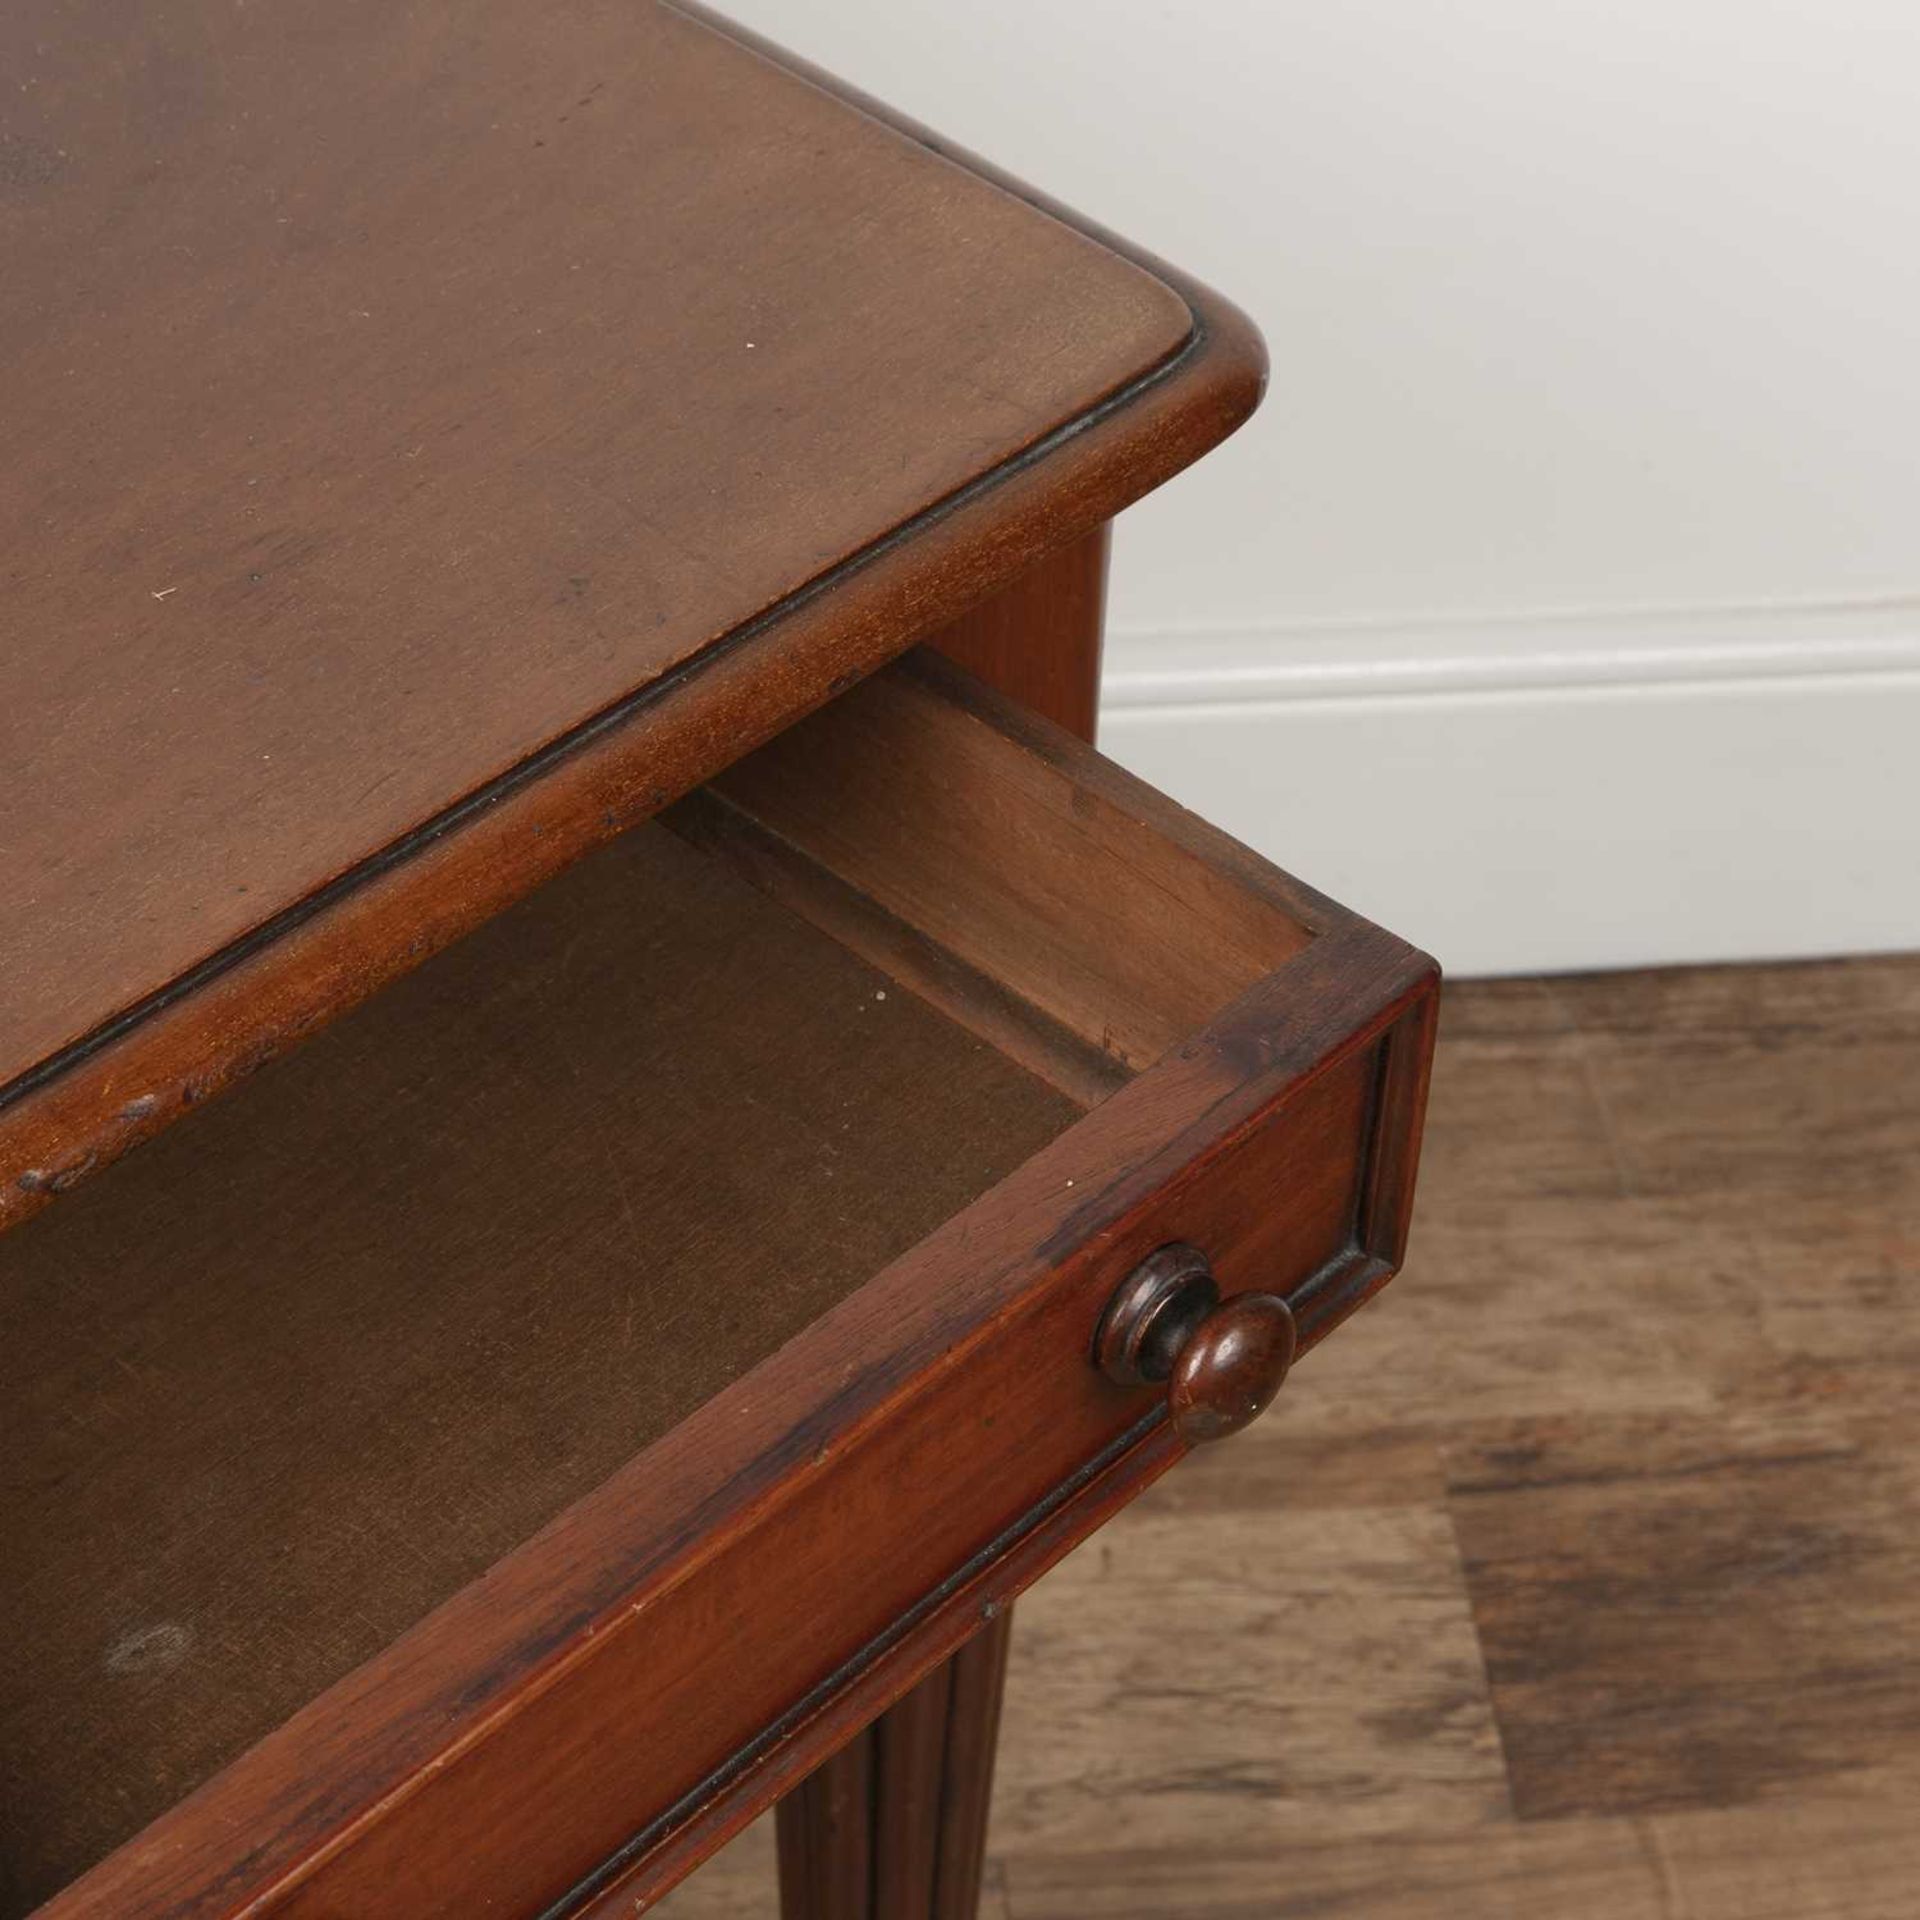 Mahogany side table Victorian, fitted two drawers, on reeded legs, 92cm wide x 51cm deep x 75cm high - Image 3 of 5